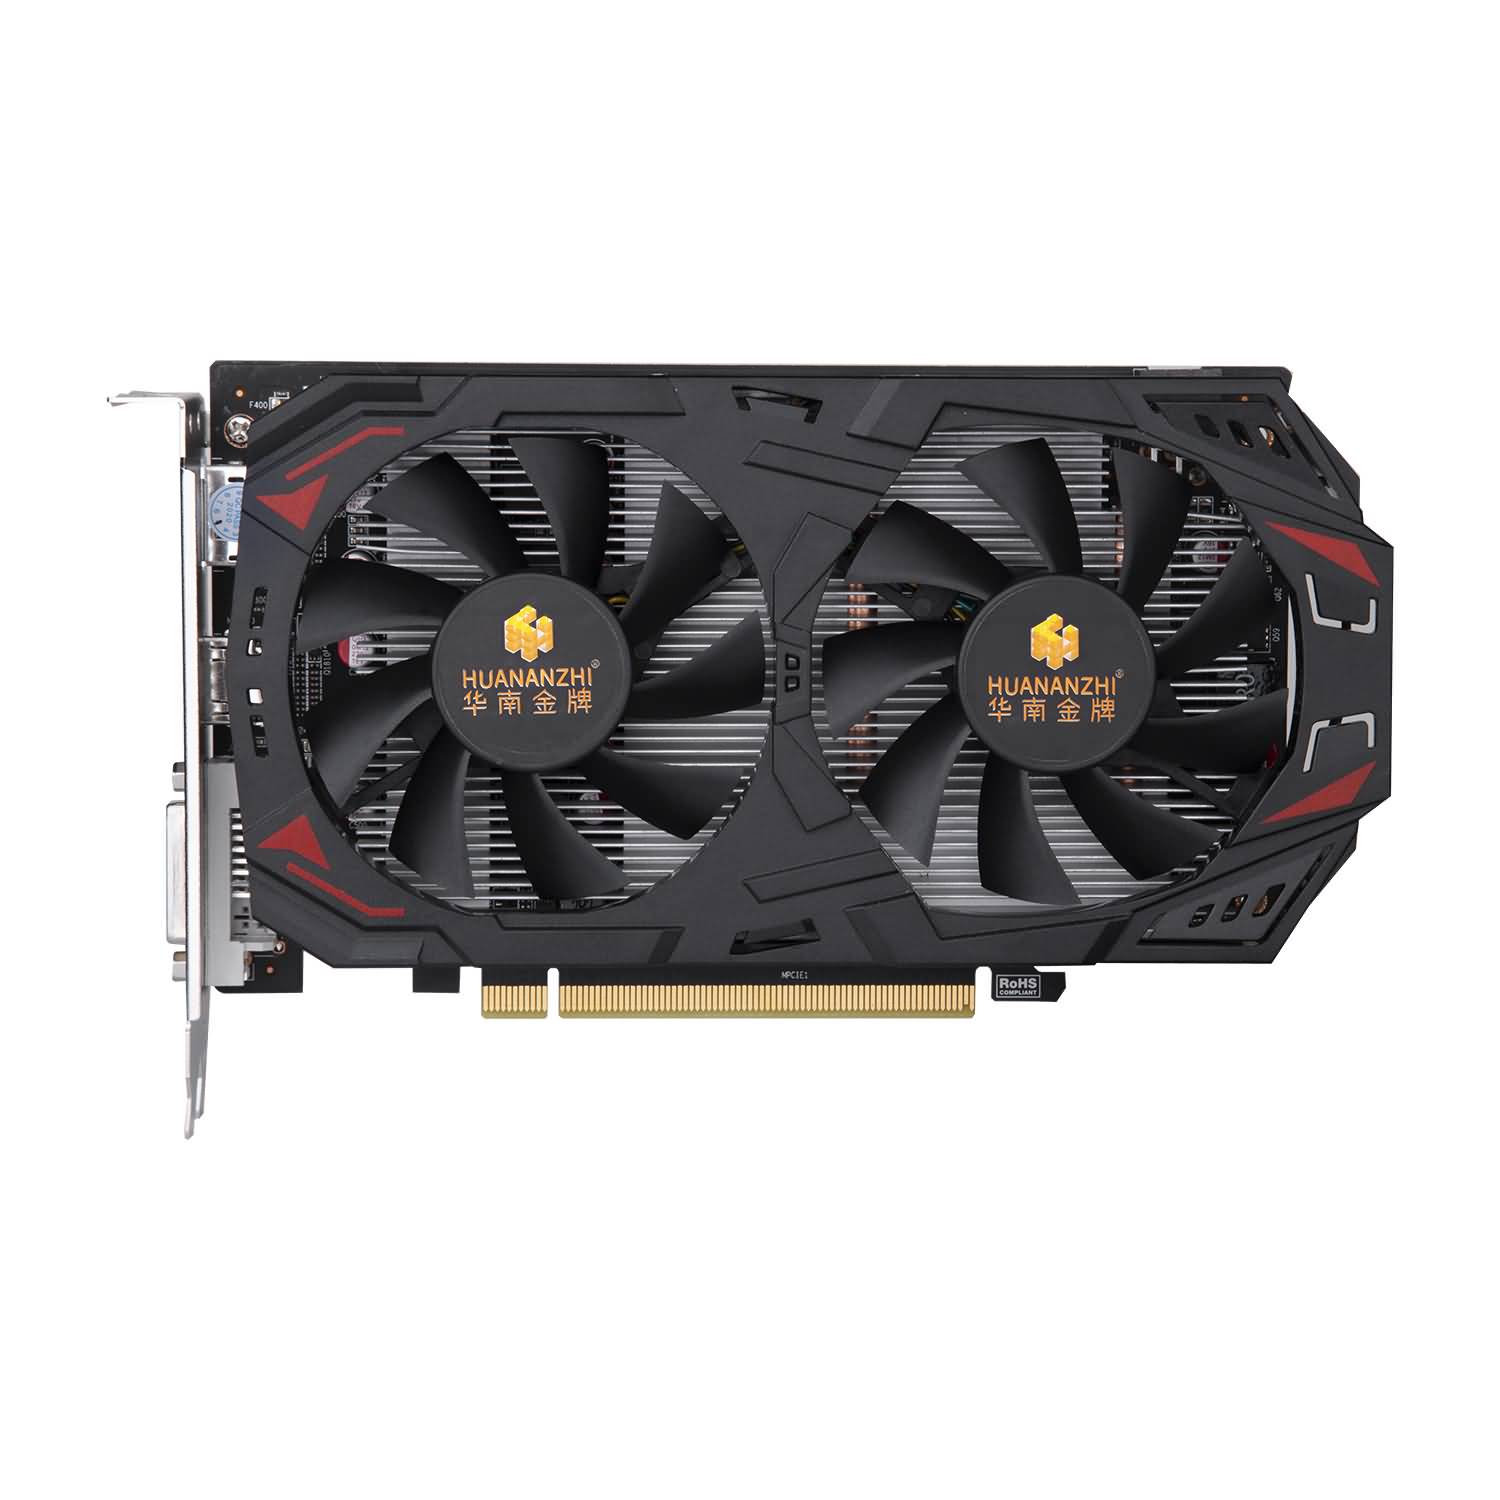 Download Huananzhi RX580 8G 2048SPGraphics Card Free